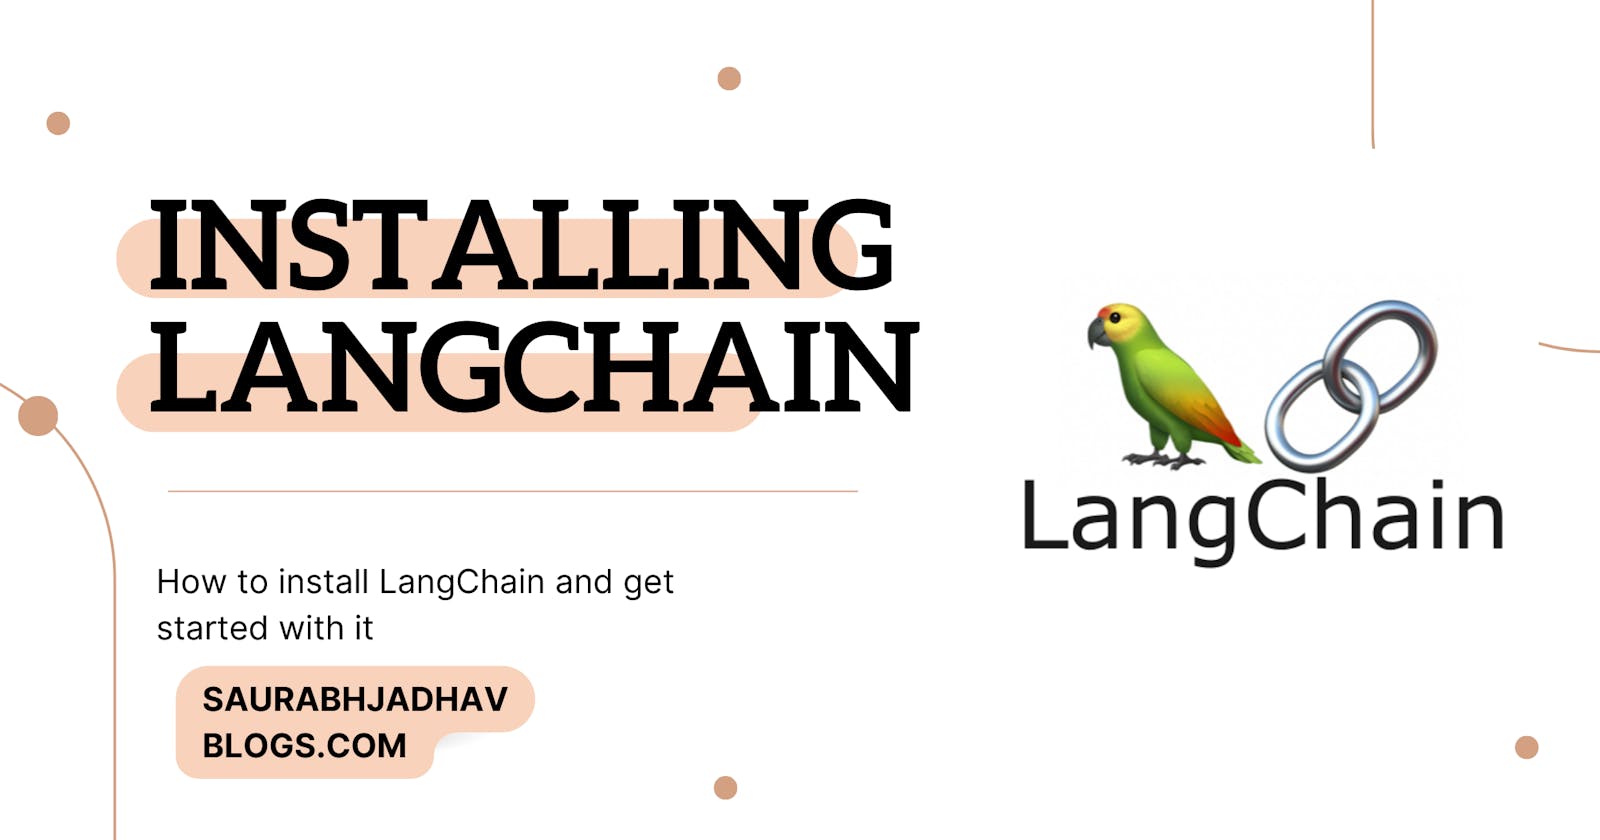 Installing LangChain: How to install LangChain and get started with it